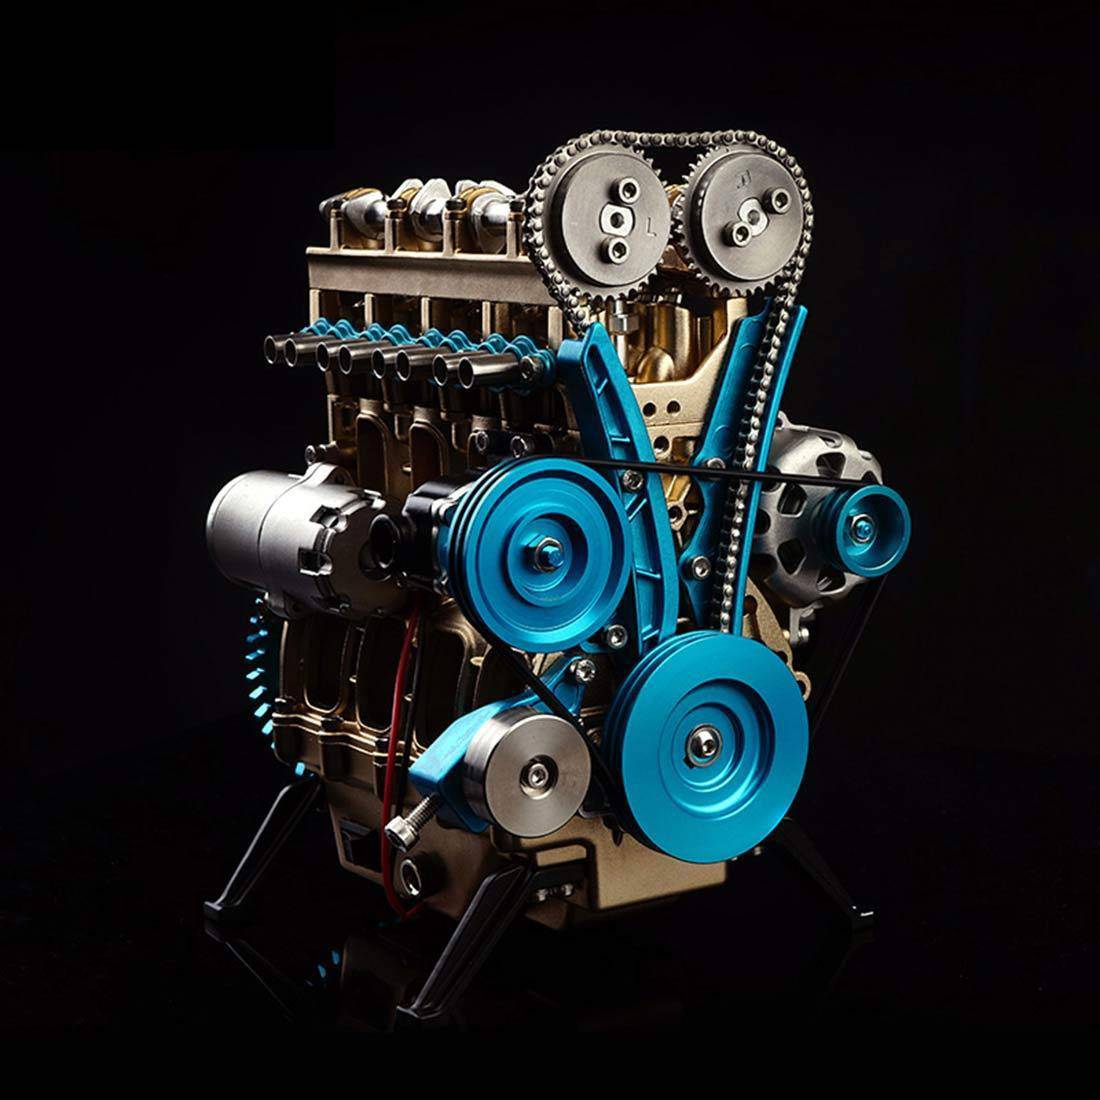 V4 Car Engine Model Full Metal Assembling Four-cylinder Building Kits for Researching Industry Studying/Toy/Gift - stirlingkit